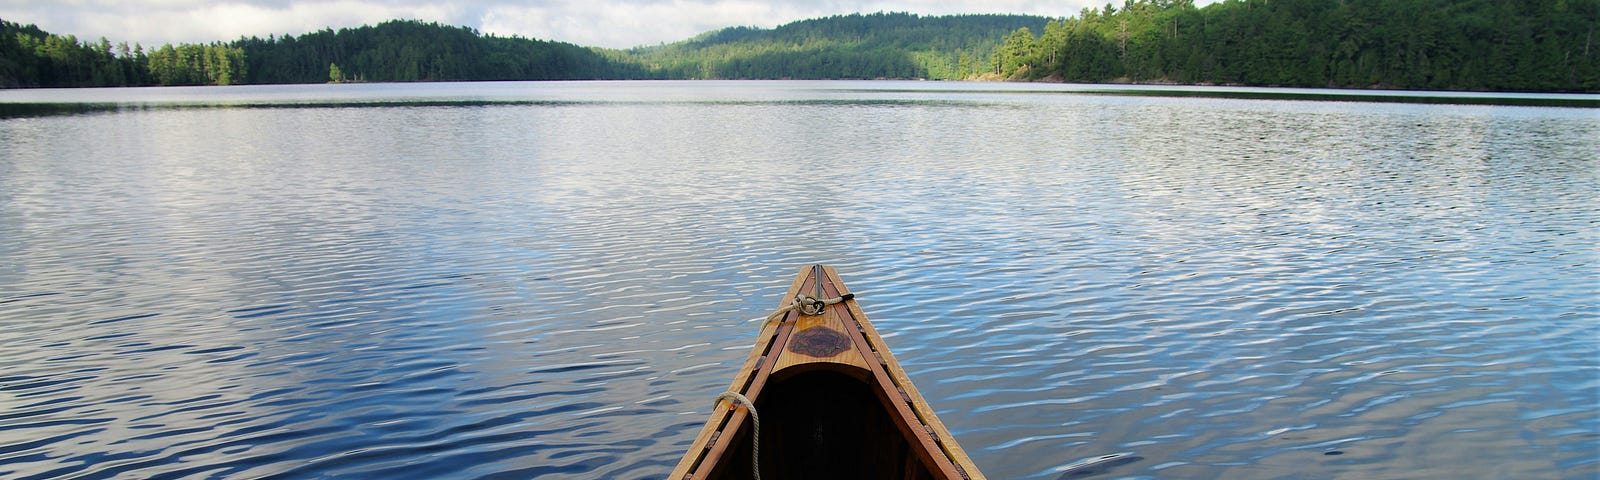 The front of a canoe on a peaceful lake